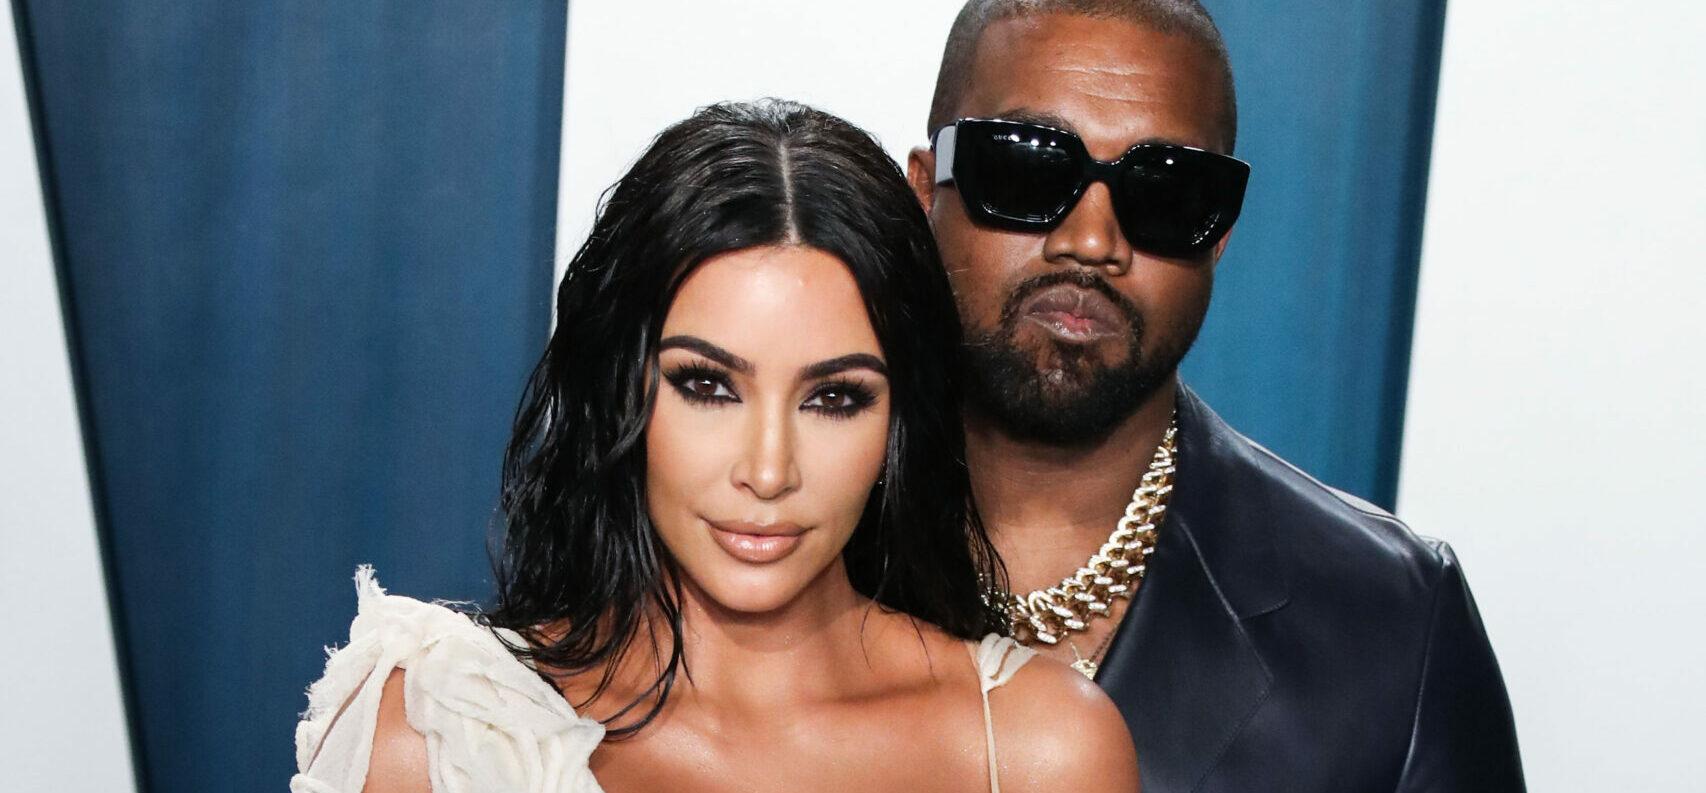 Kim Kardashian & Kanye West Divorce Is Back ON, Buys Him Out Of Family Home